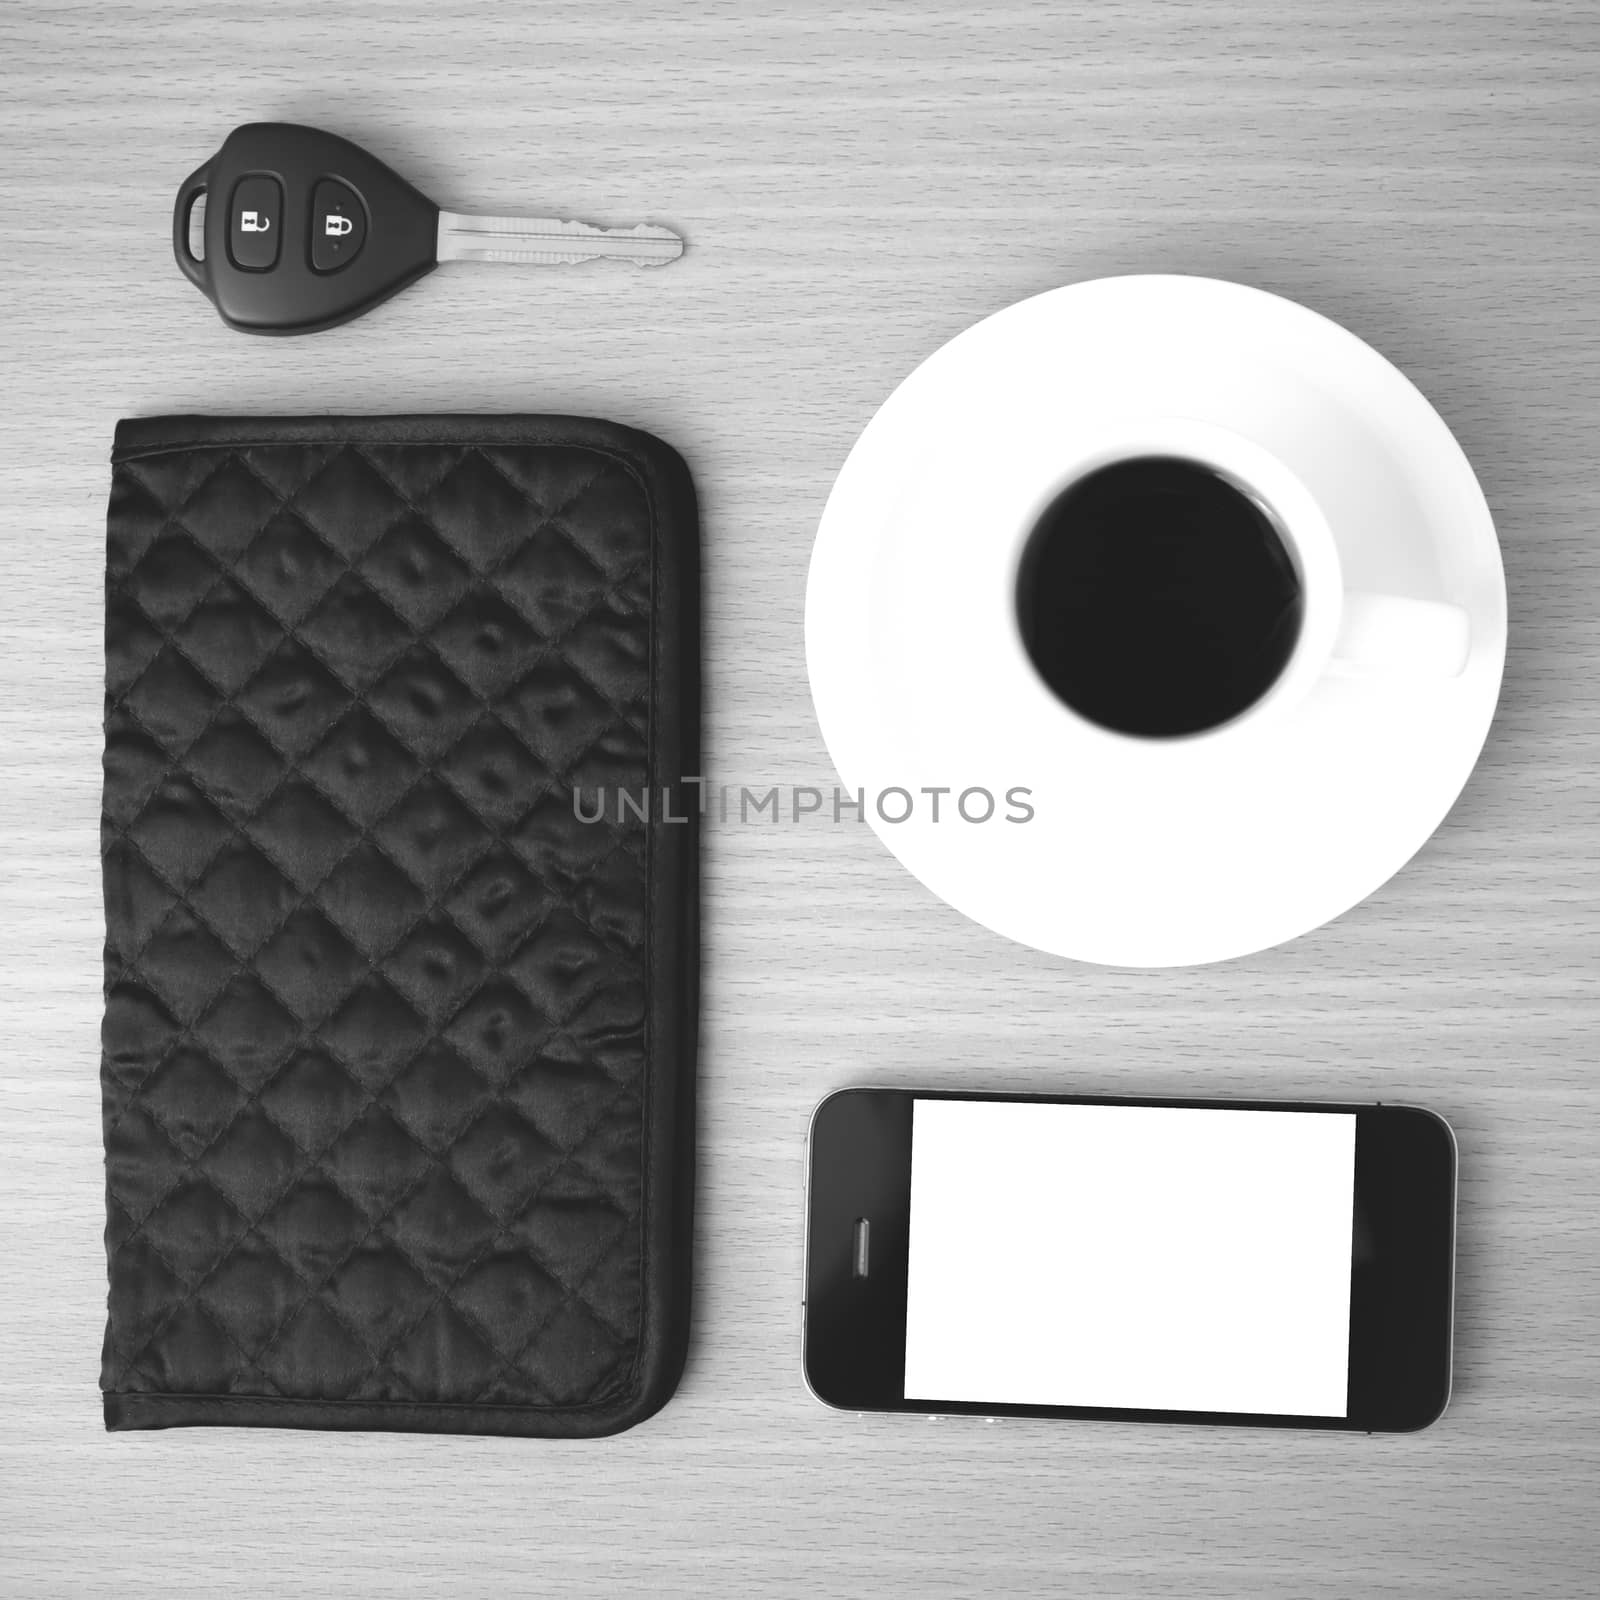 coffee cup with phone car key and wallet  by ammza12